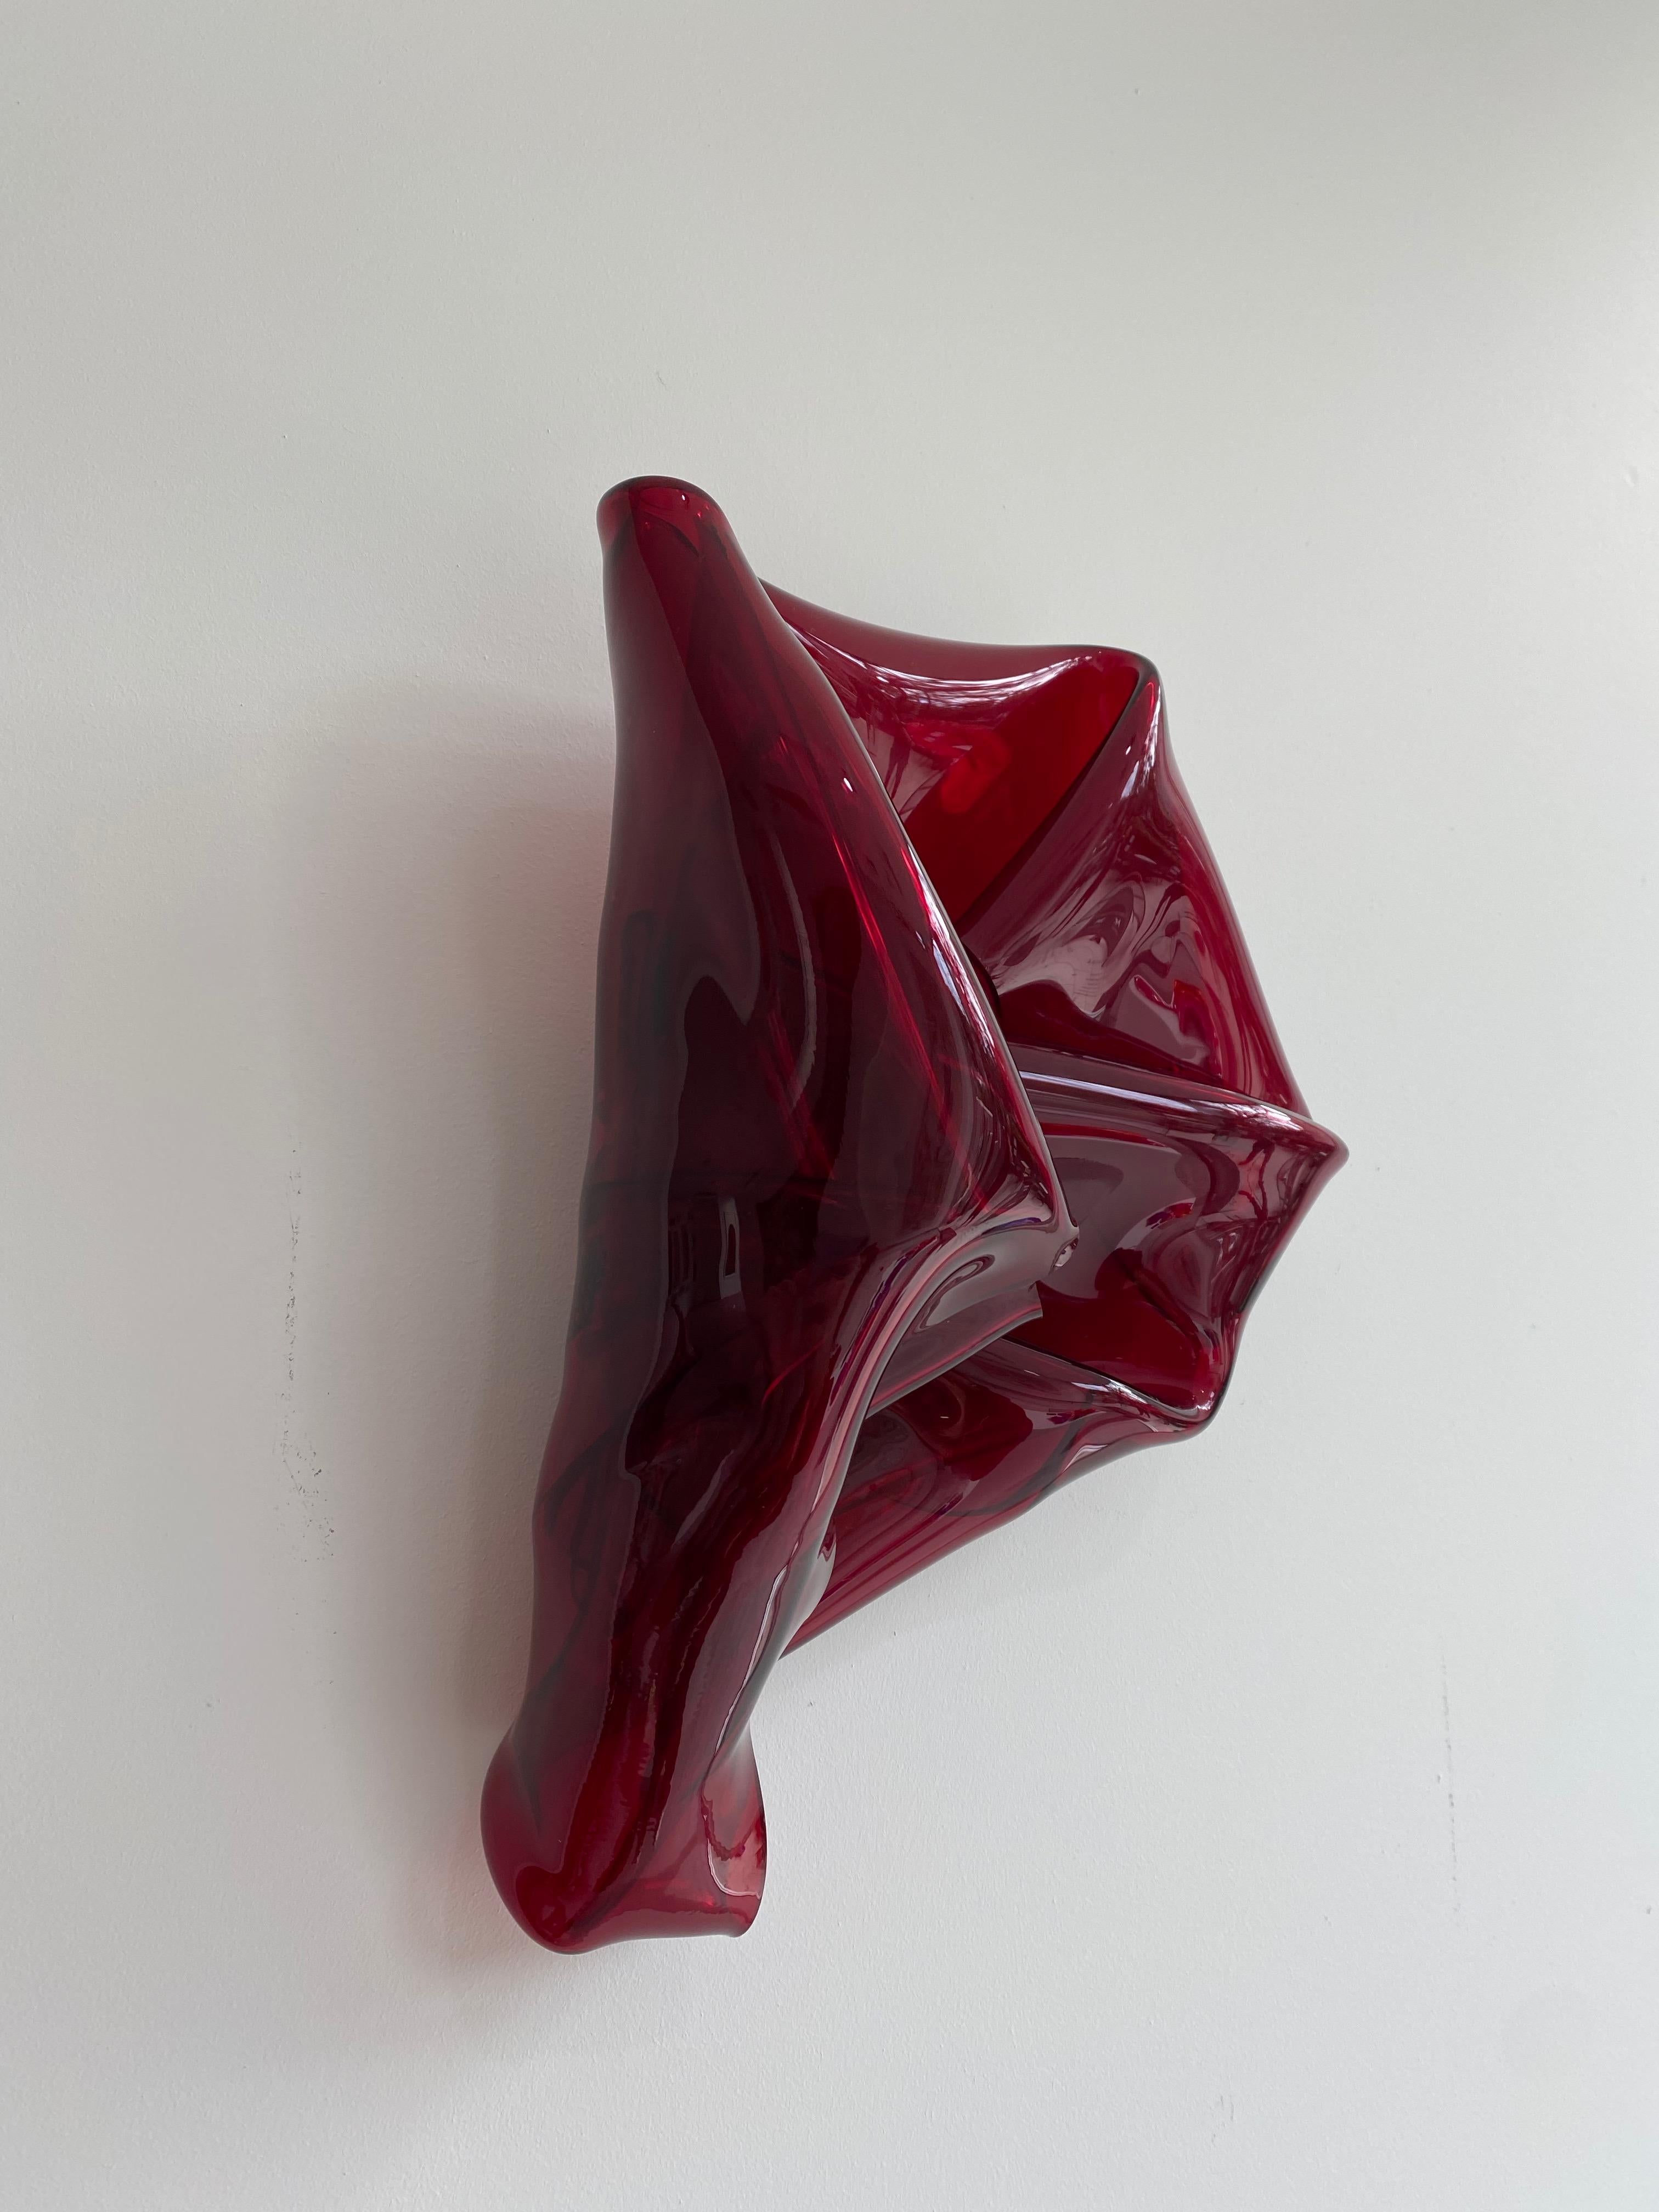 'Dark Red Side Fold', Colourful contemporary abstract wall sculpture - Sculpture by Anya Pesce